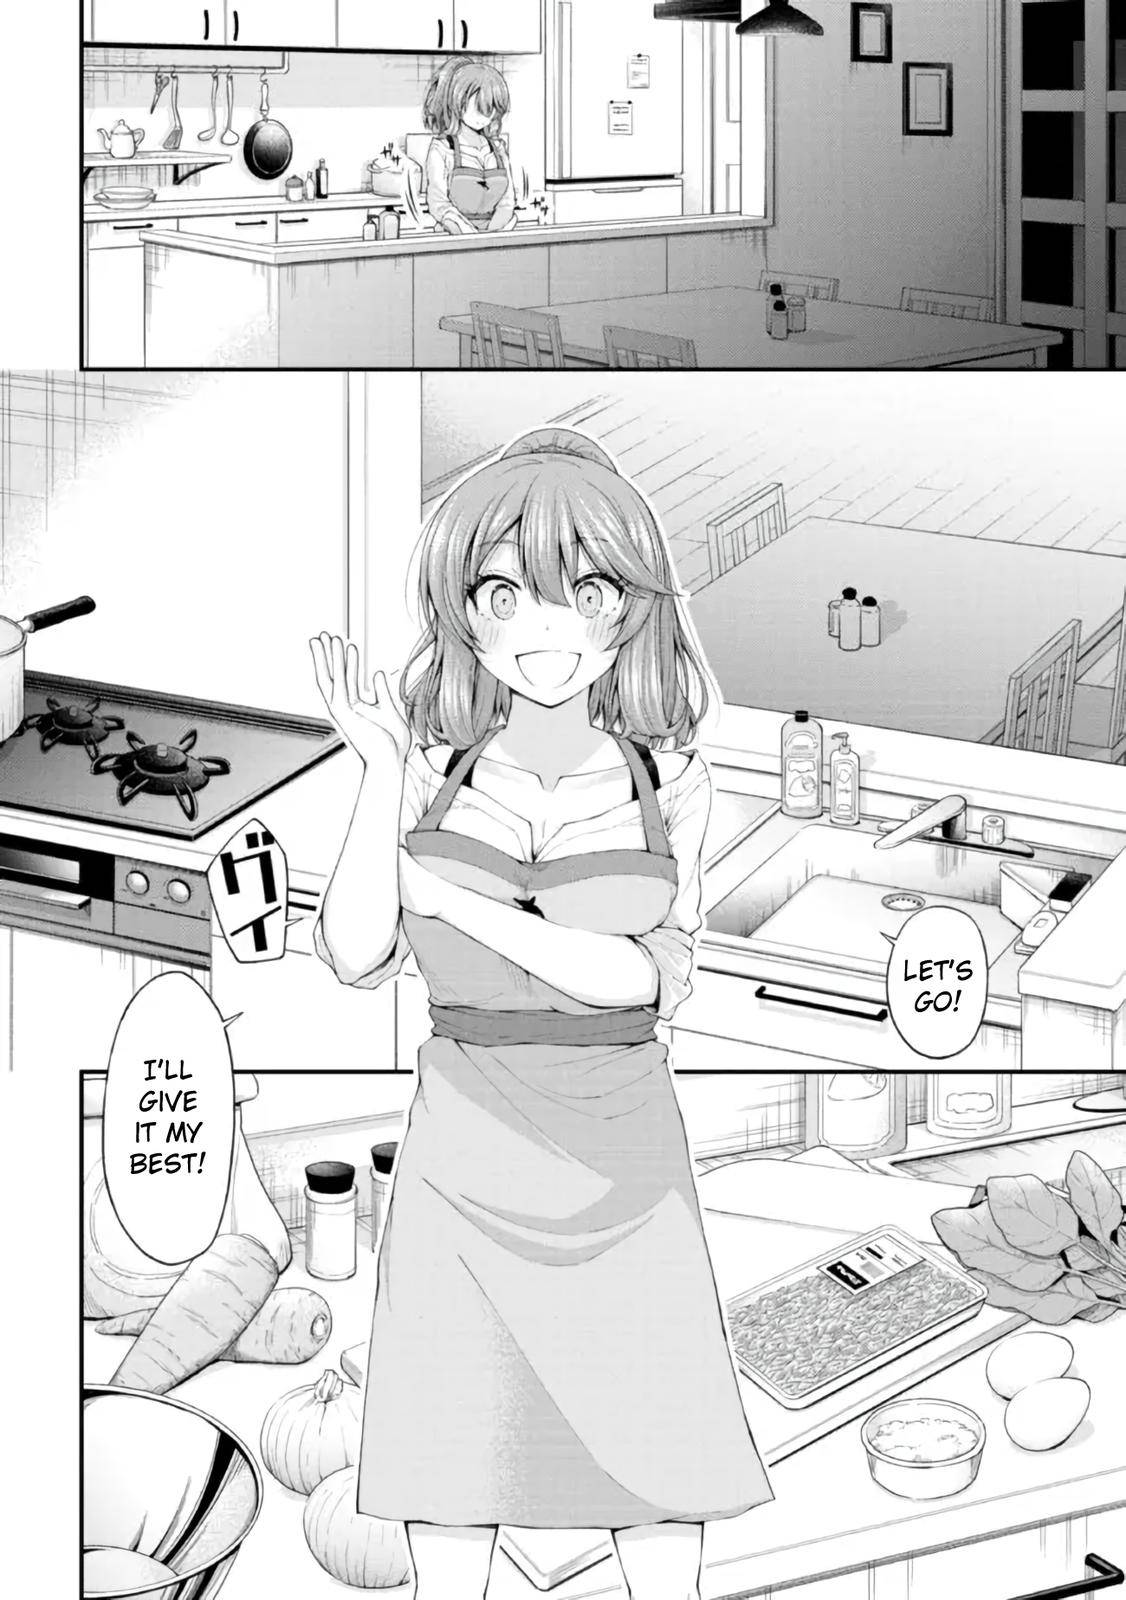 The Gal Who Was Meant to Confess to Me as a Game Punishment - chapter 4.5 - #6